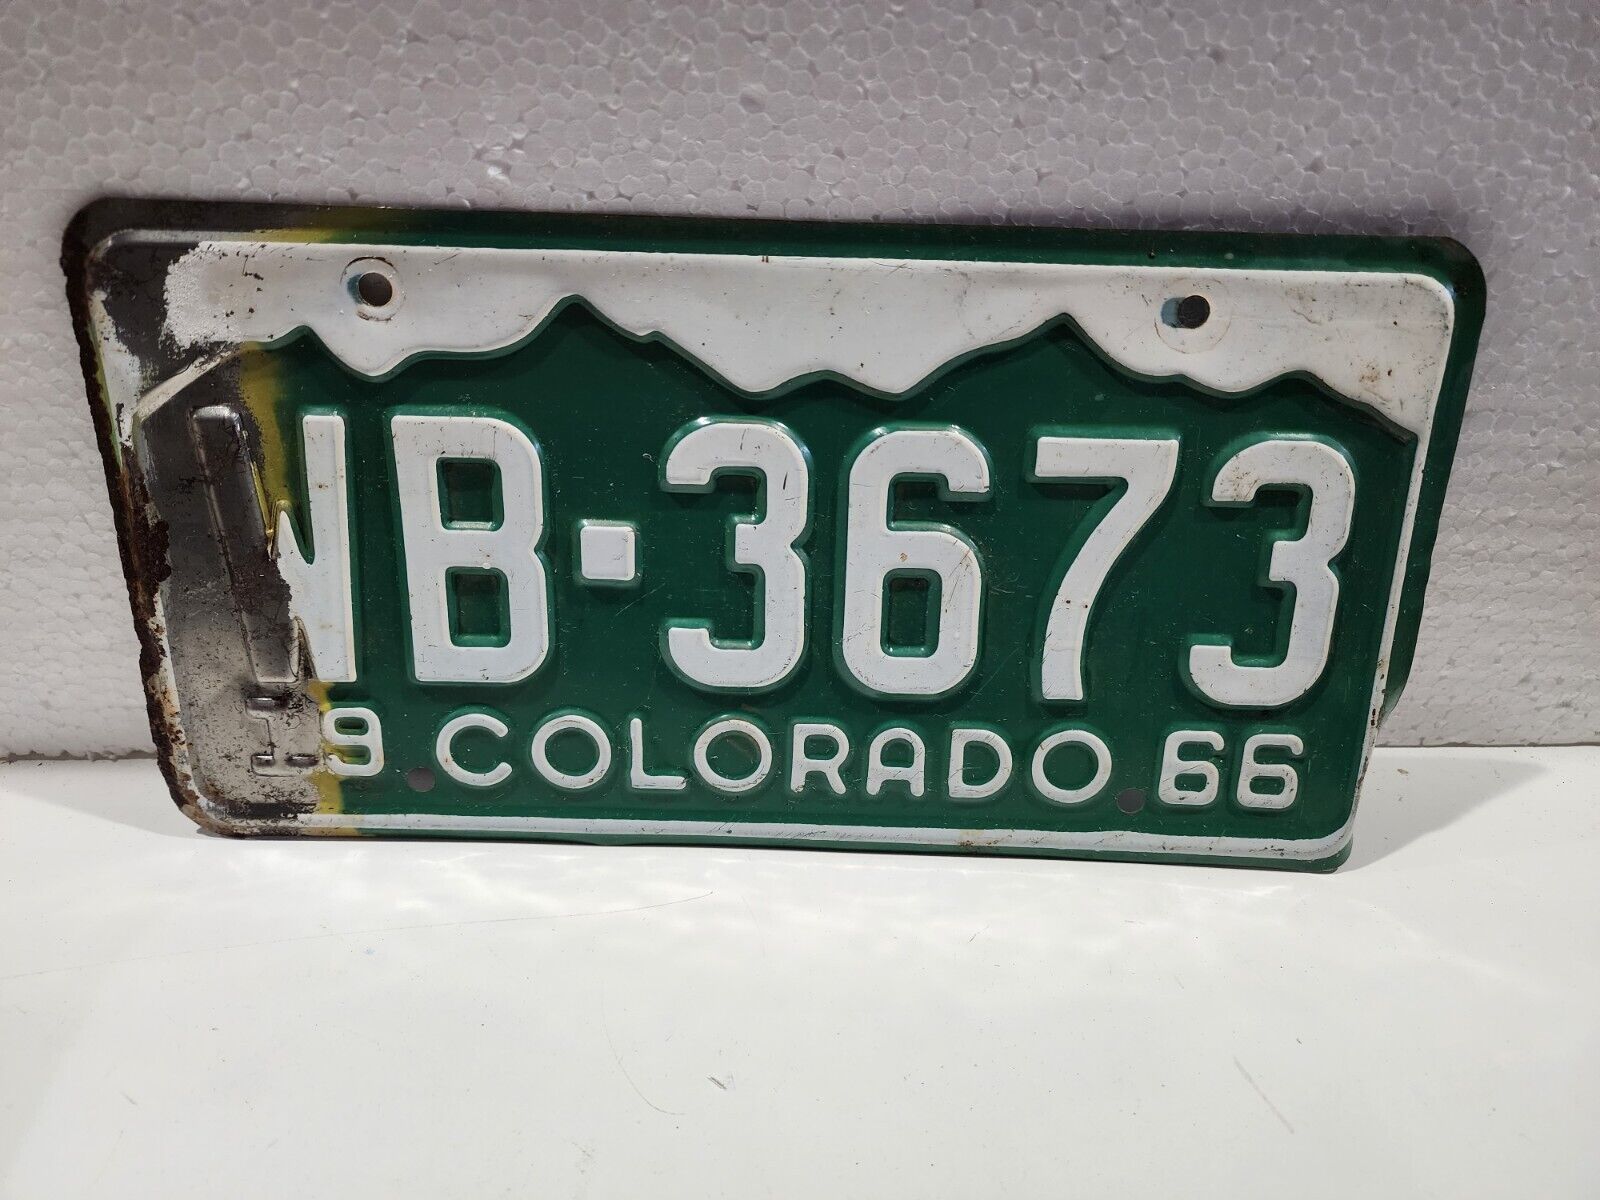 Vintage 1966 CO Colorado State LICENSE PLATE CAR Auto WB 3673 Green Mountains